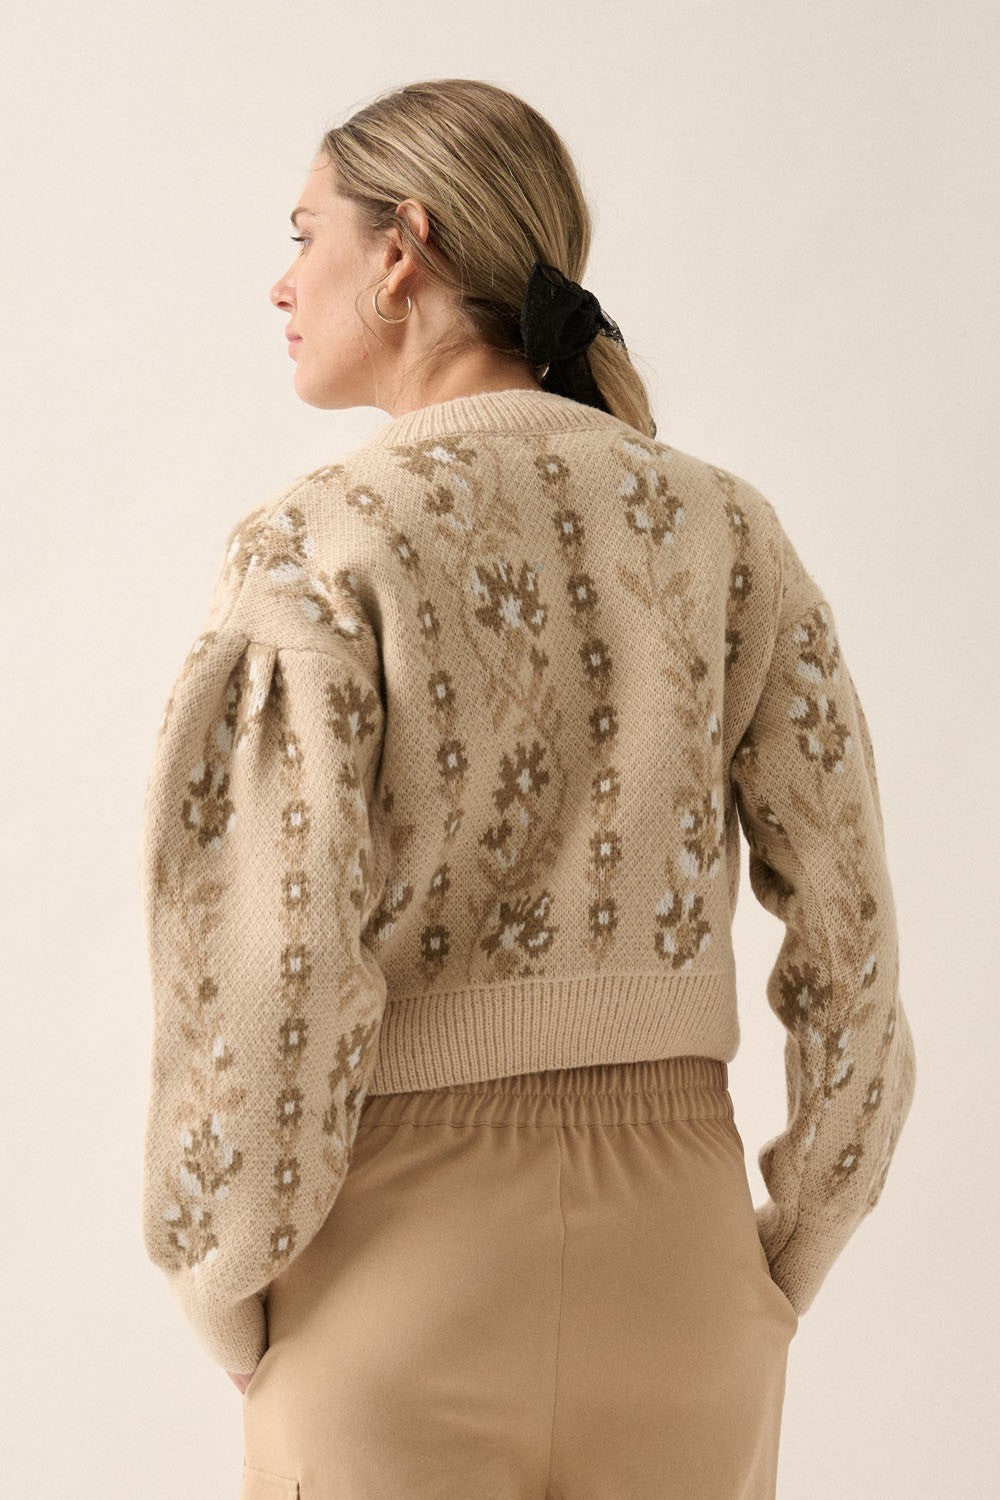 Floral-Daydream-Long-Sleeve-Knit-Sweater-Cream-Beige-Avah